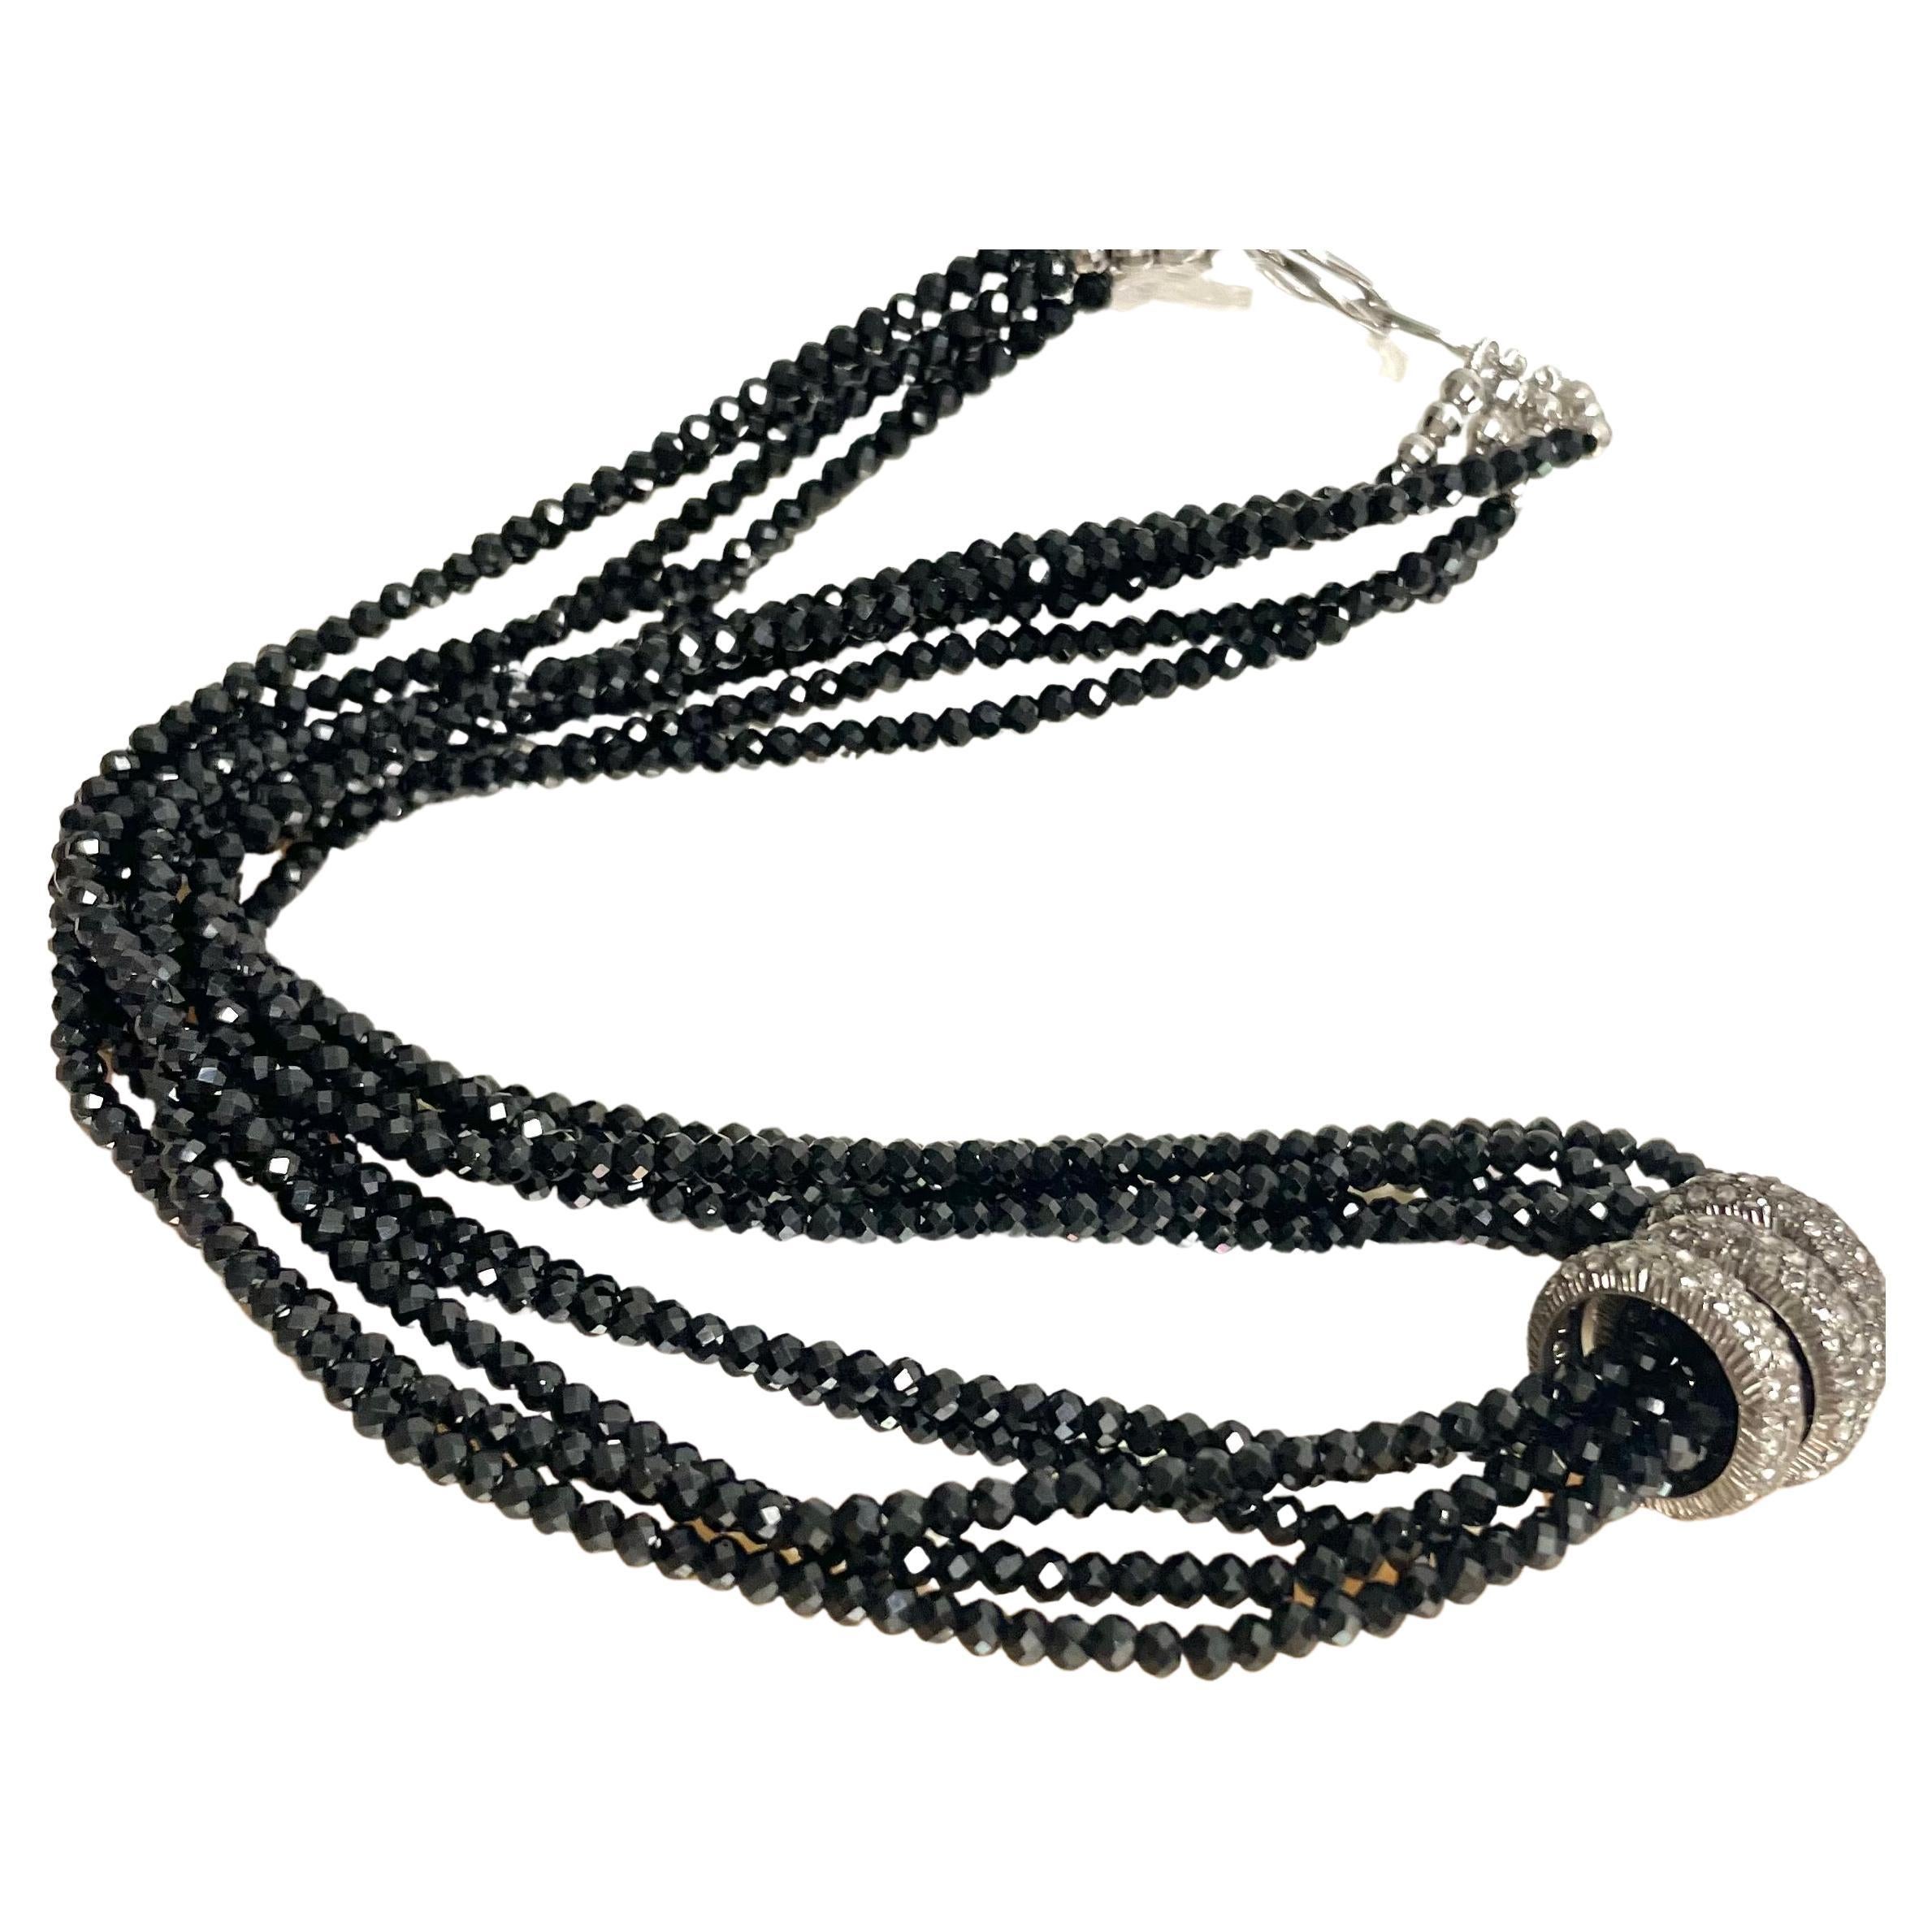 Bead Black Spinel with Floating Pave Diamond Rings 5 Strand Necklace For Sale